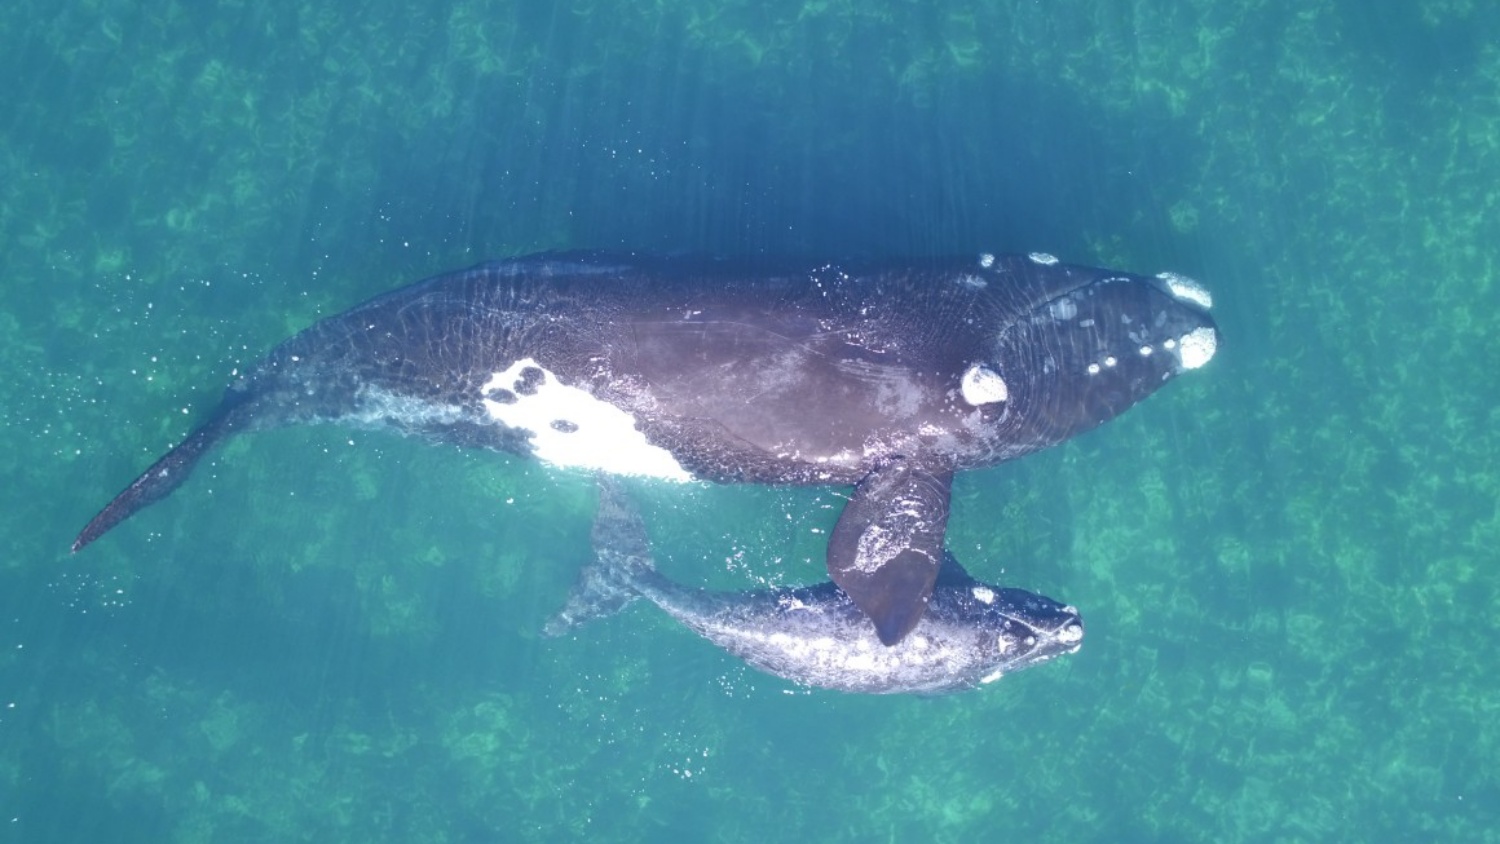 DJI Inspire 1 drone used to 'weigh' whales from above